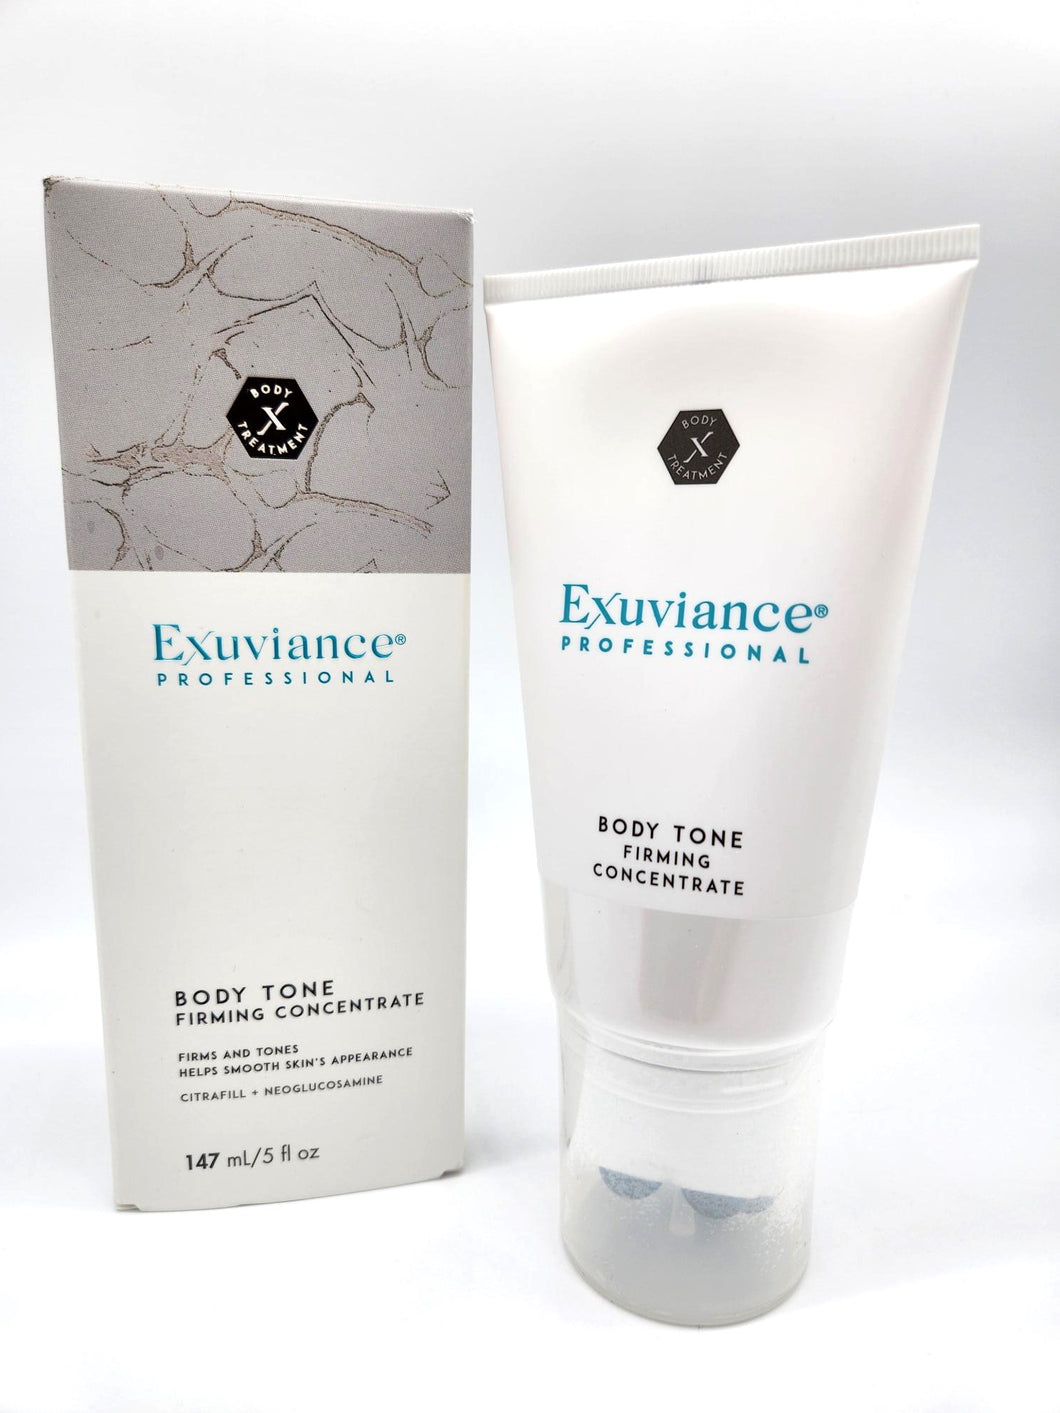 Exuviance Professional Body Tone Firming Concentrate - 147 mL